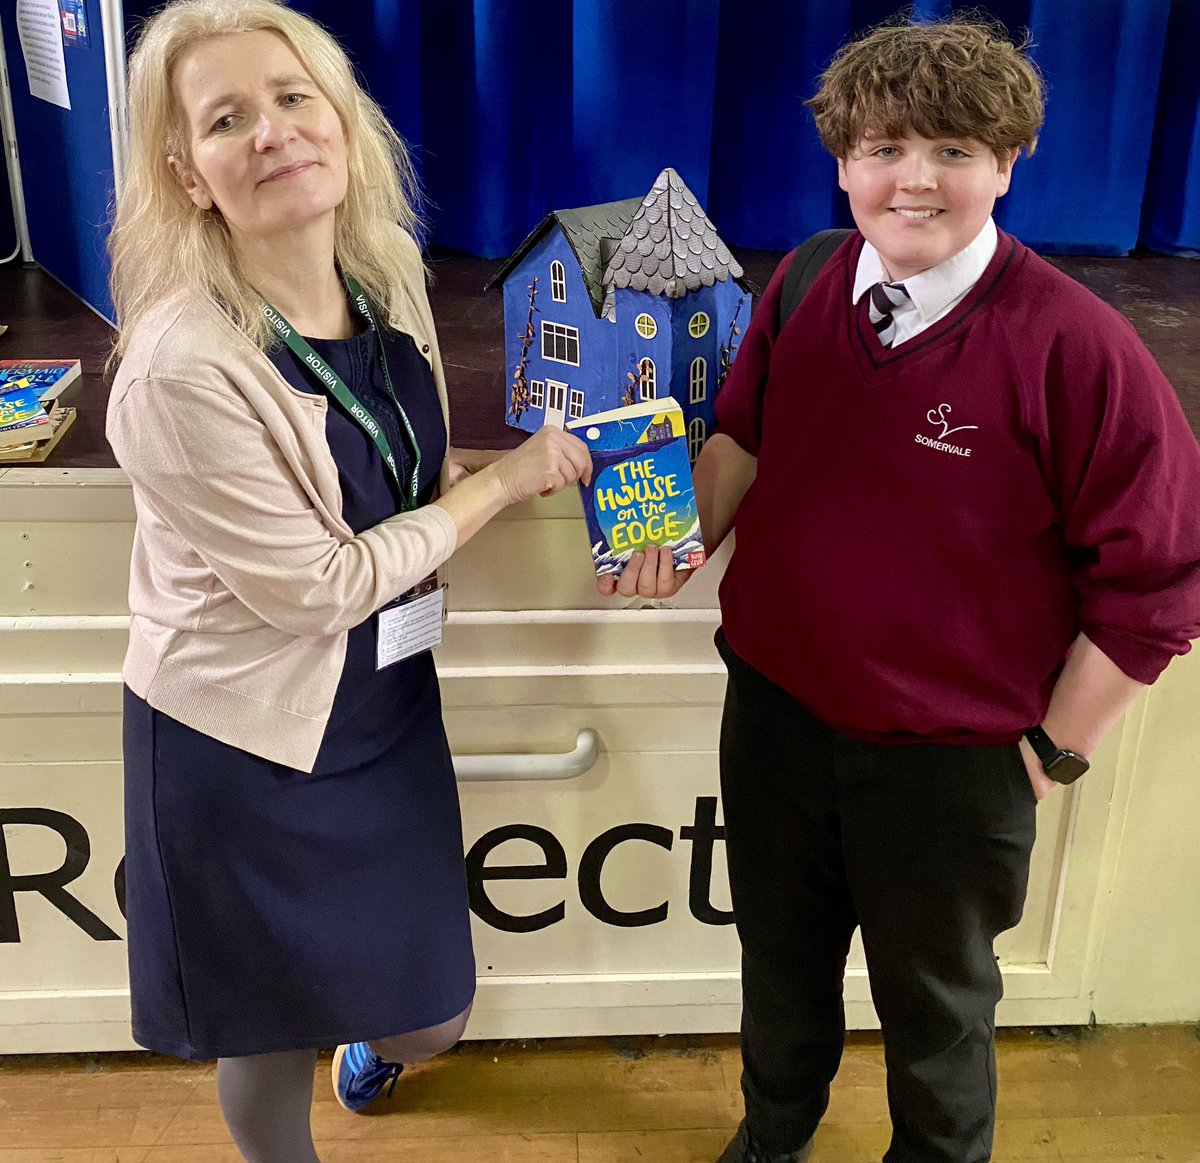 @AlexFCotter it was amazing to have you visit us @somervaleschool this afternoon, kicking off our week of @WorldBookDayUK celebrations and our @ReadforGoodUK sponsored read!  📚

Thanks for a thoroughly entertaining presentation & writing workshop - year 7 loved it! 🙌📚📖